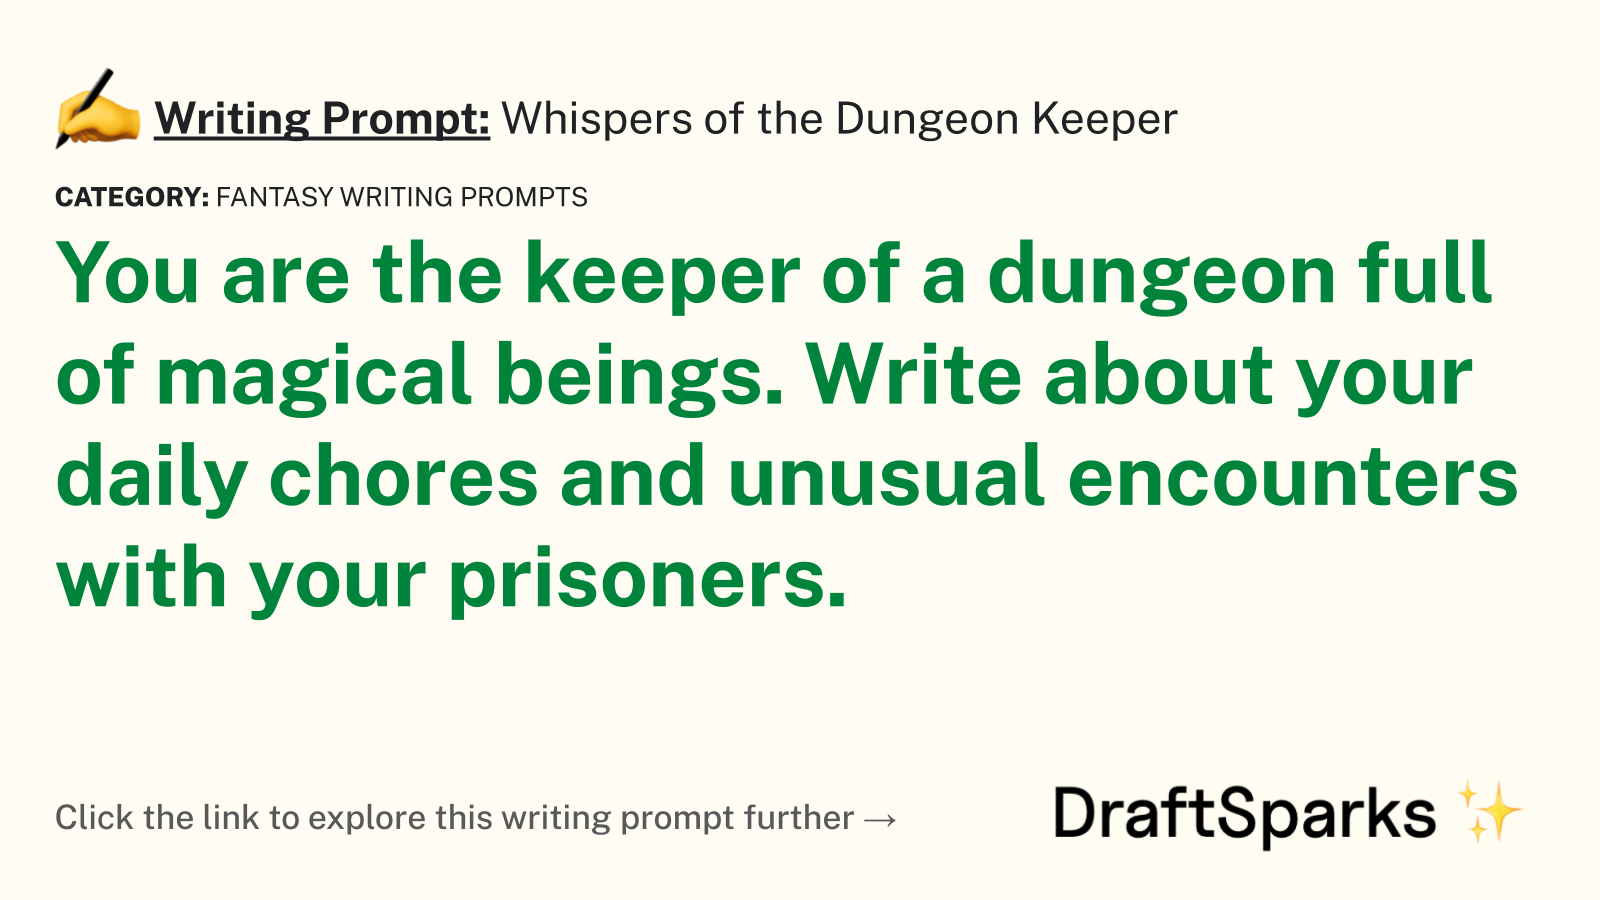 Whispers of the Dungeon Keeper